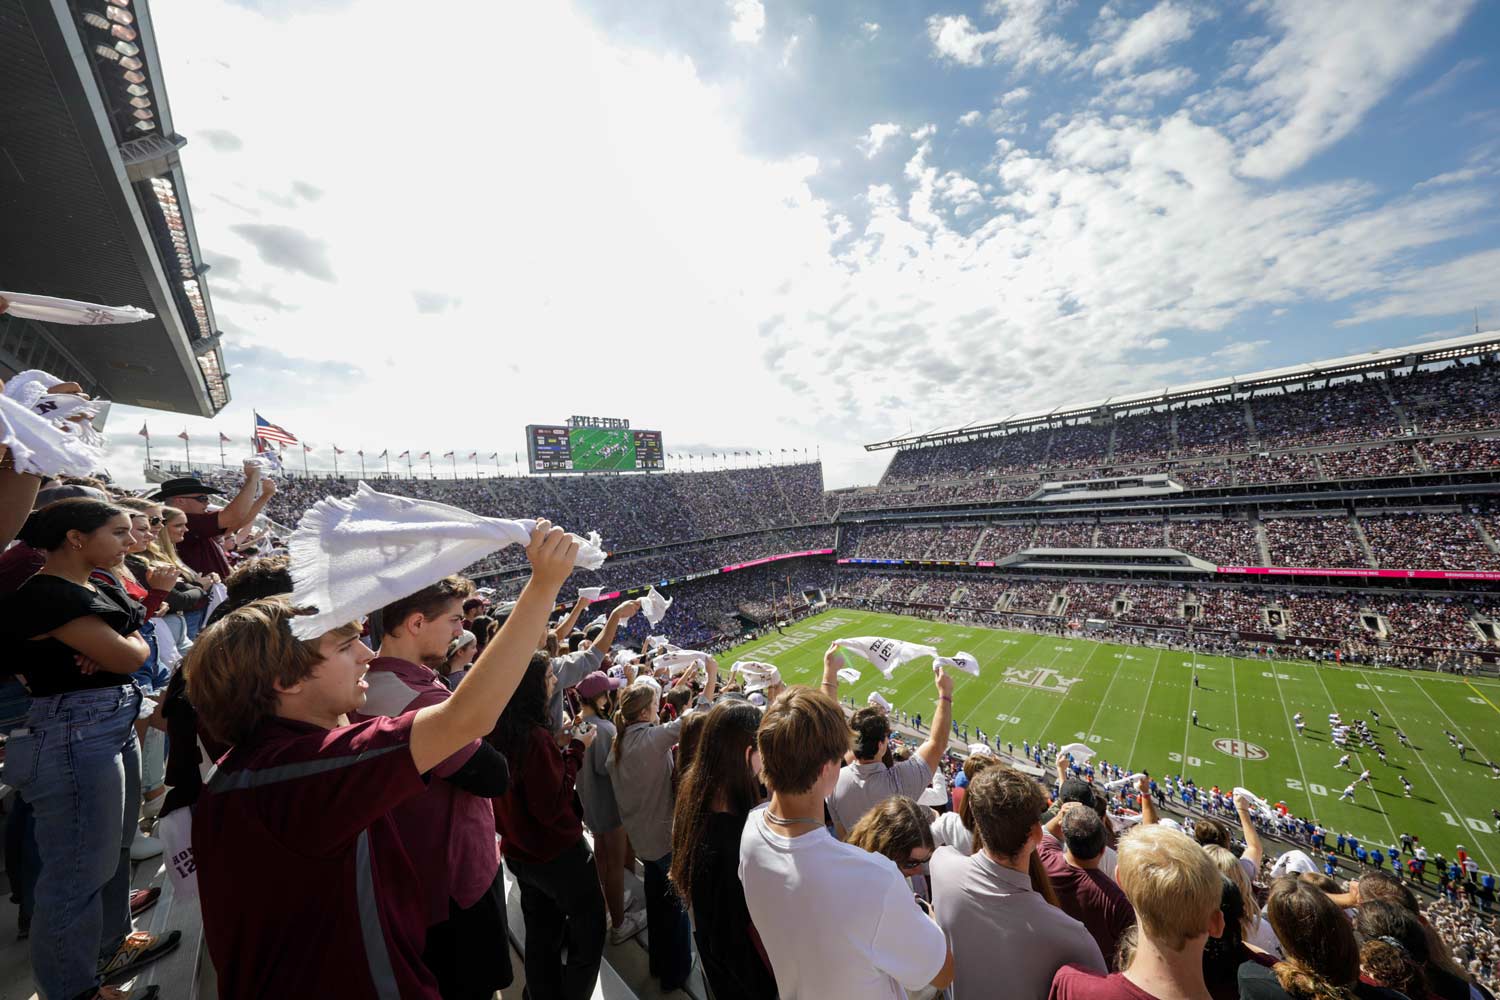 A view of Kyle Field from within the Aggie student section